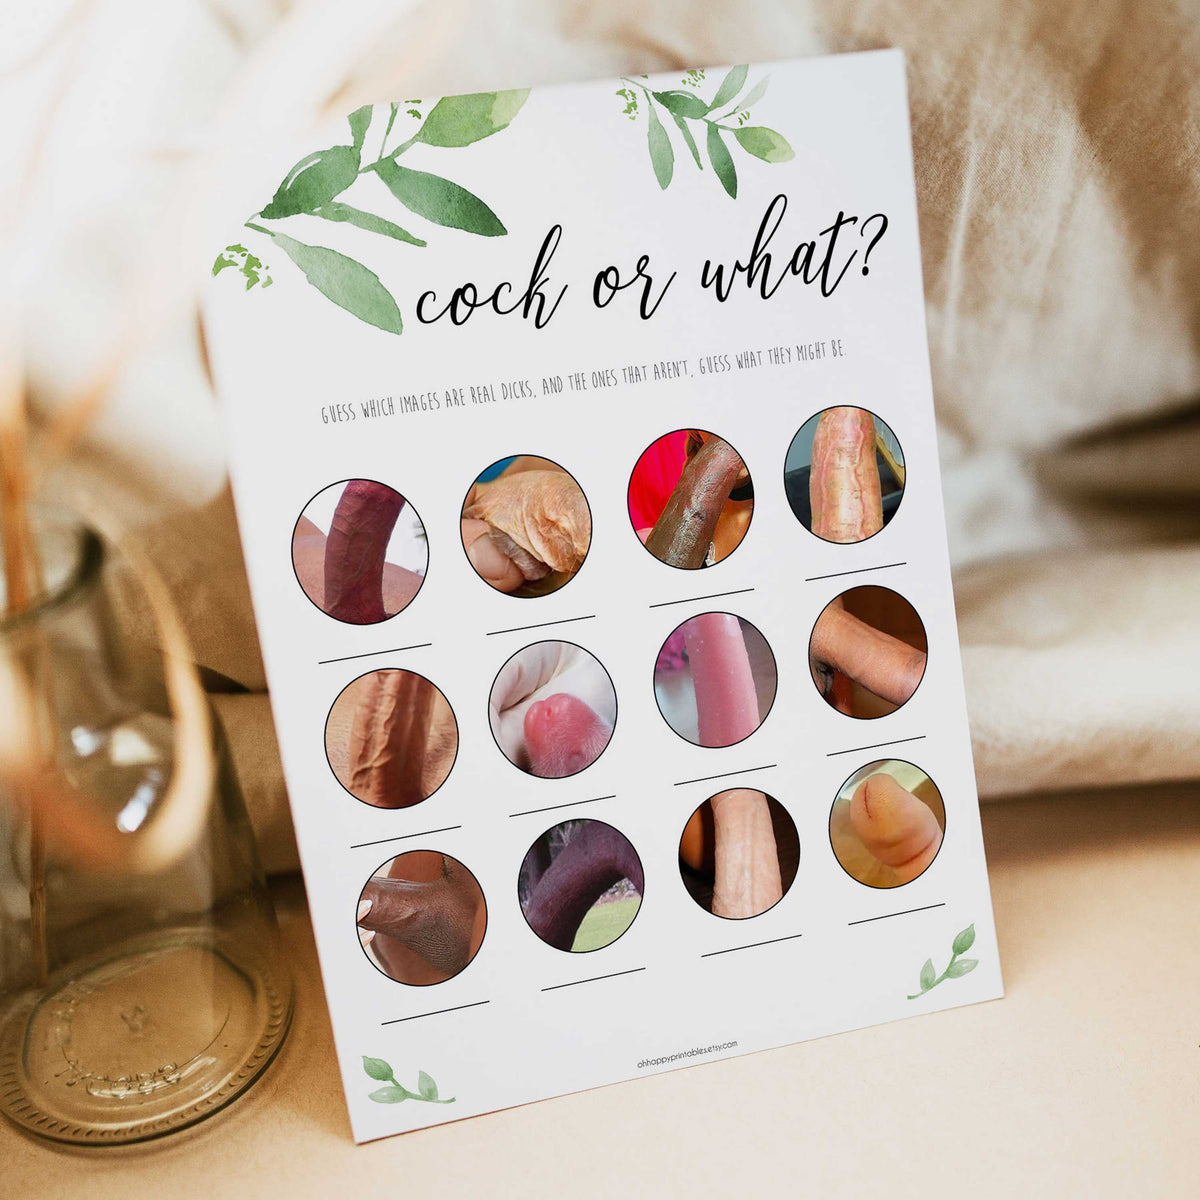 cock or what bachelorette game, greenery bridal shower, fun bridal shower games, bachelorette party games, floral bridal games, hen party ideas